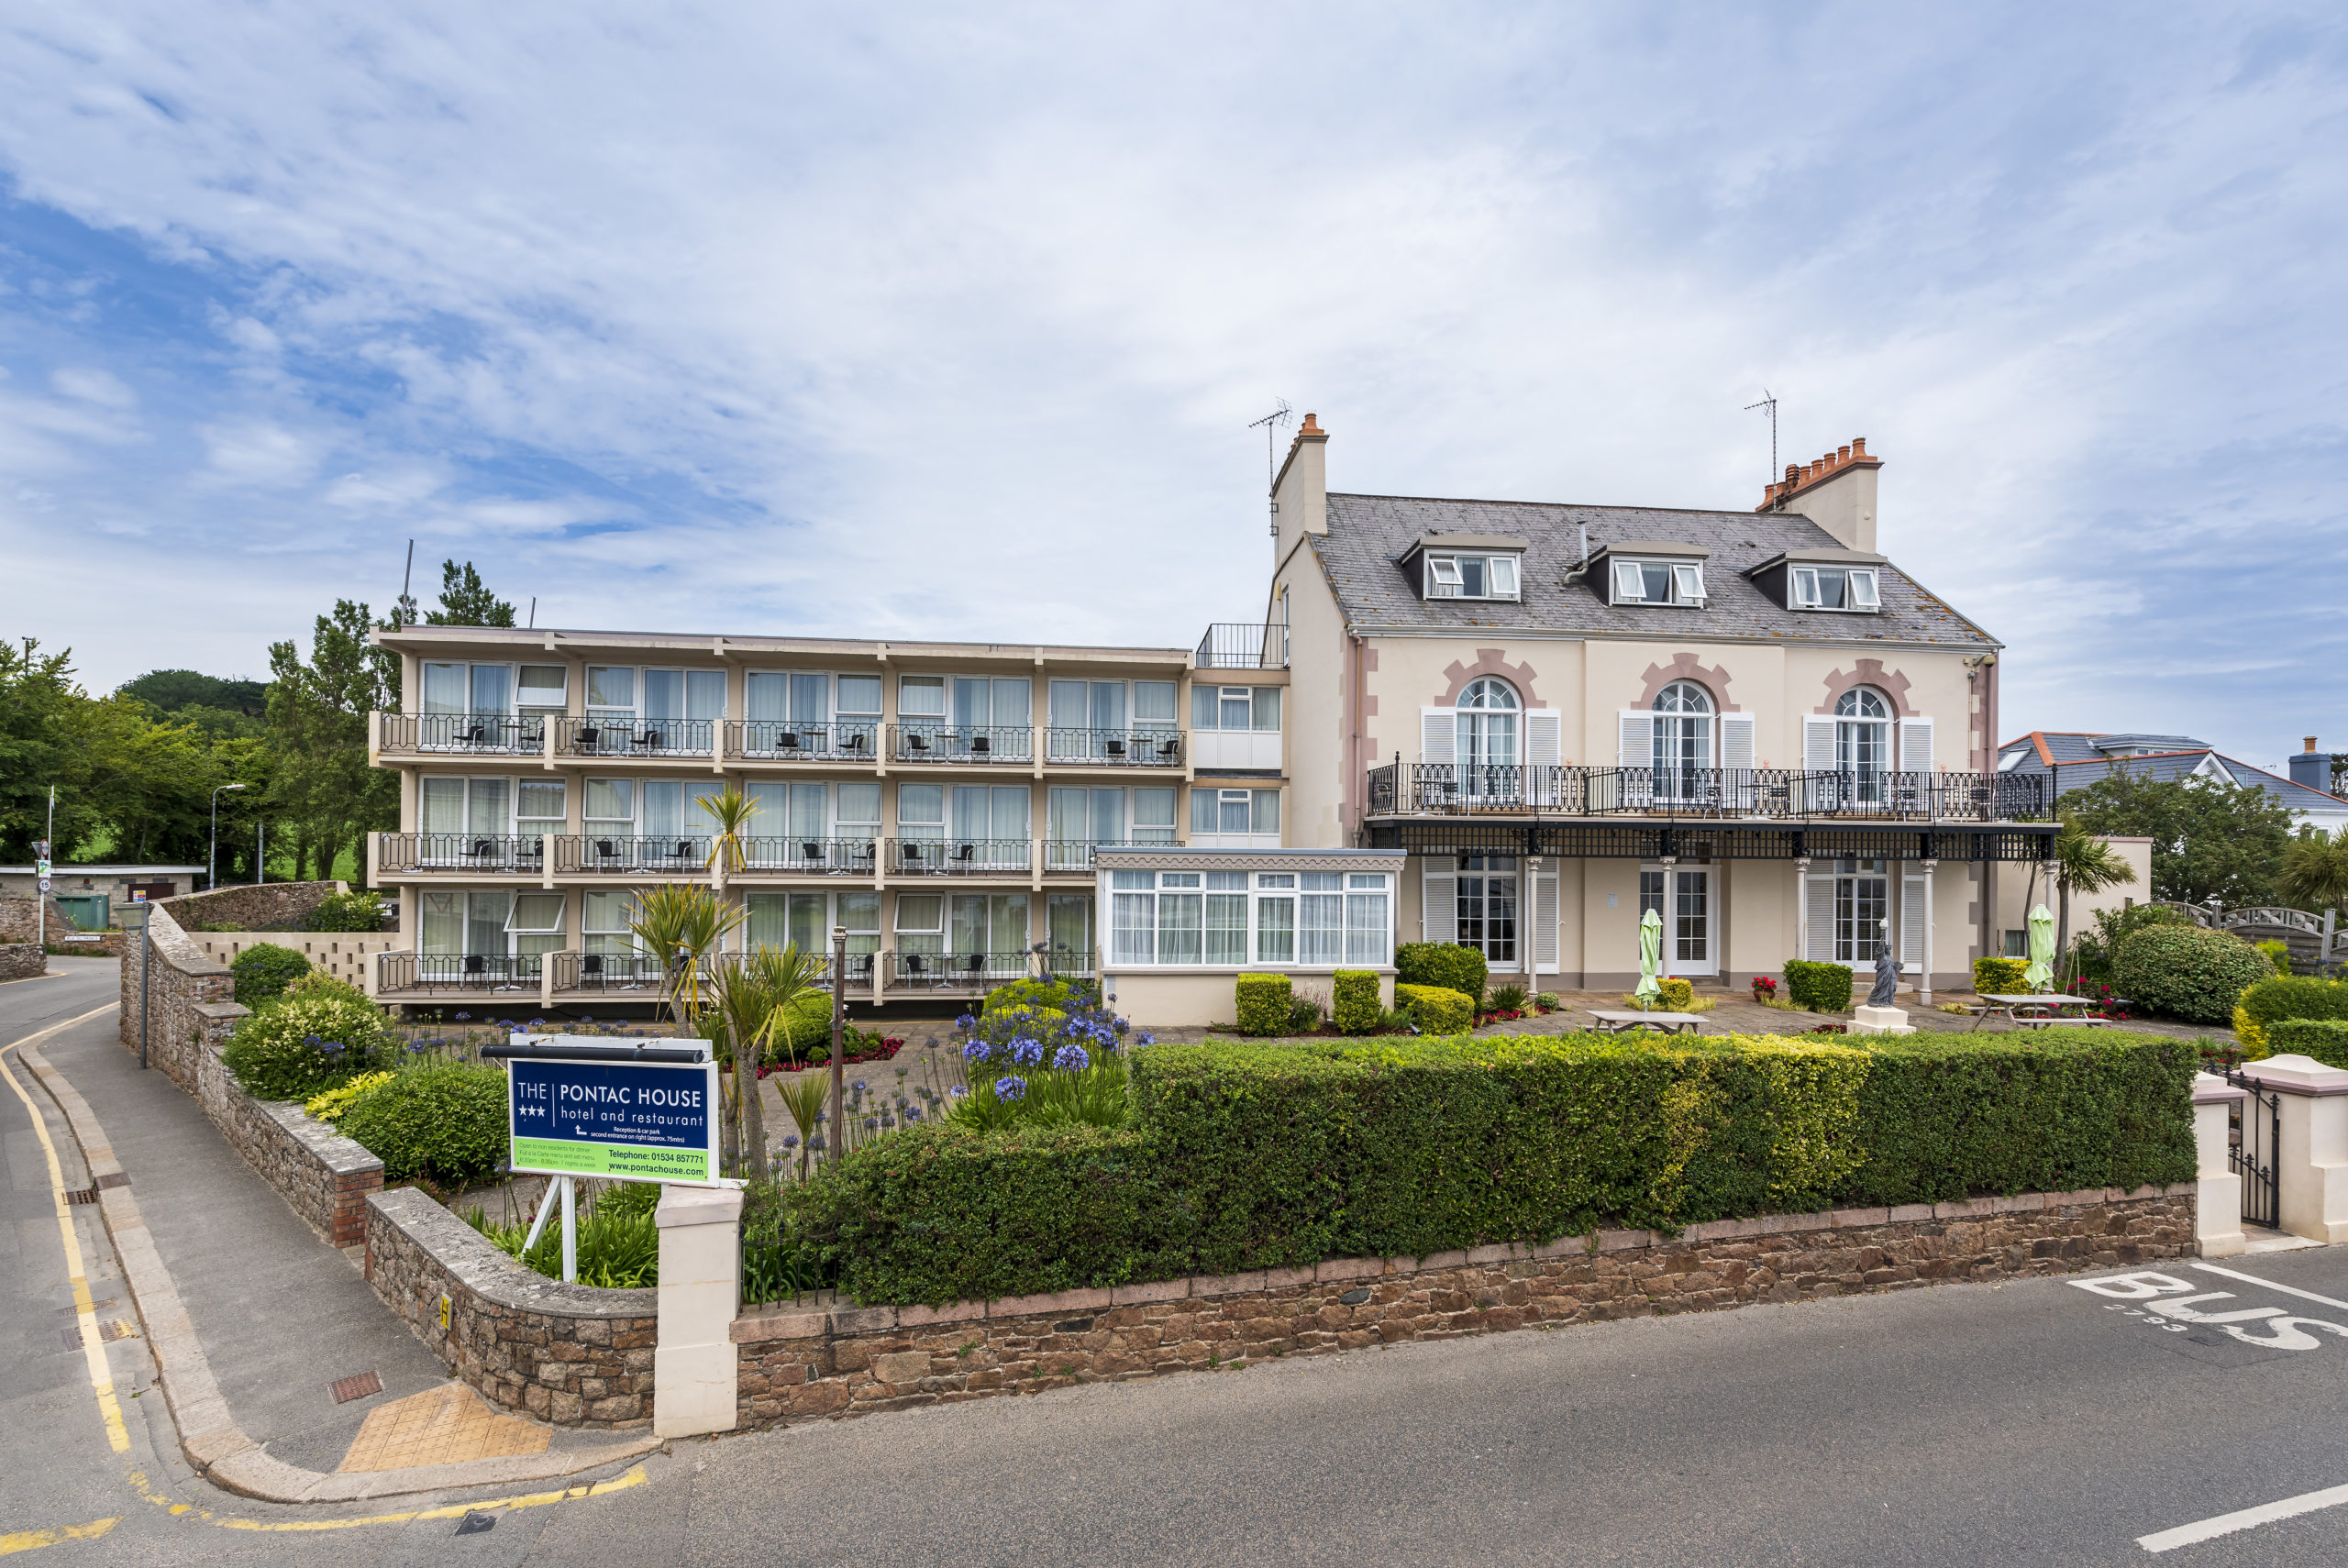 The Pontac House Hotel, St. Clement's Bay, Jersey